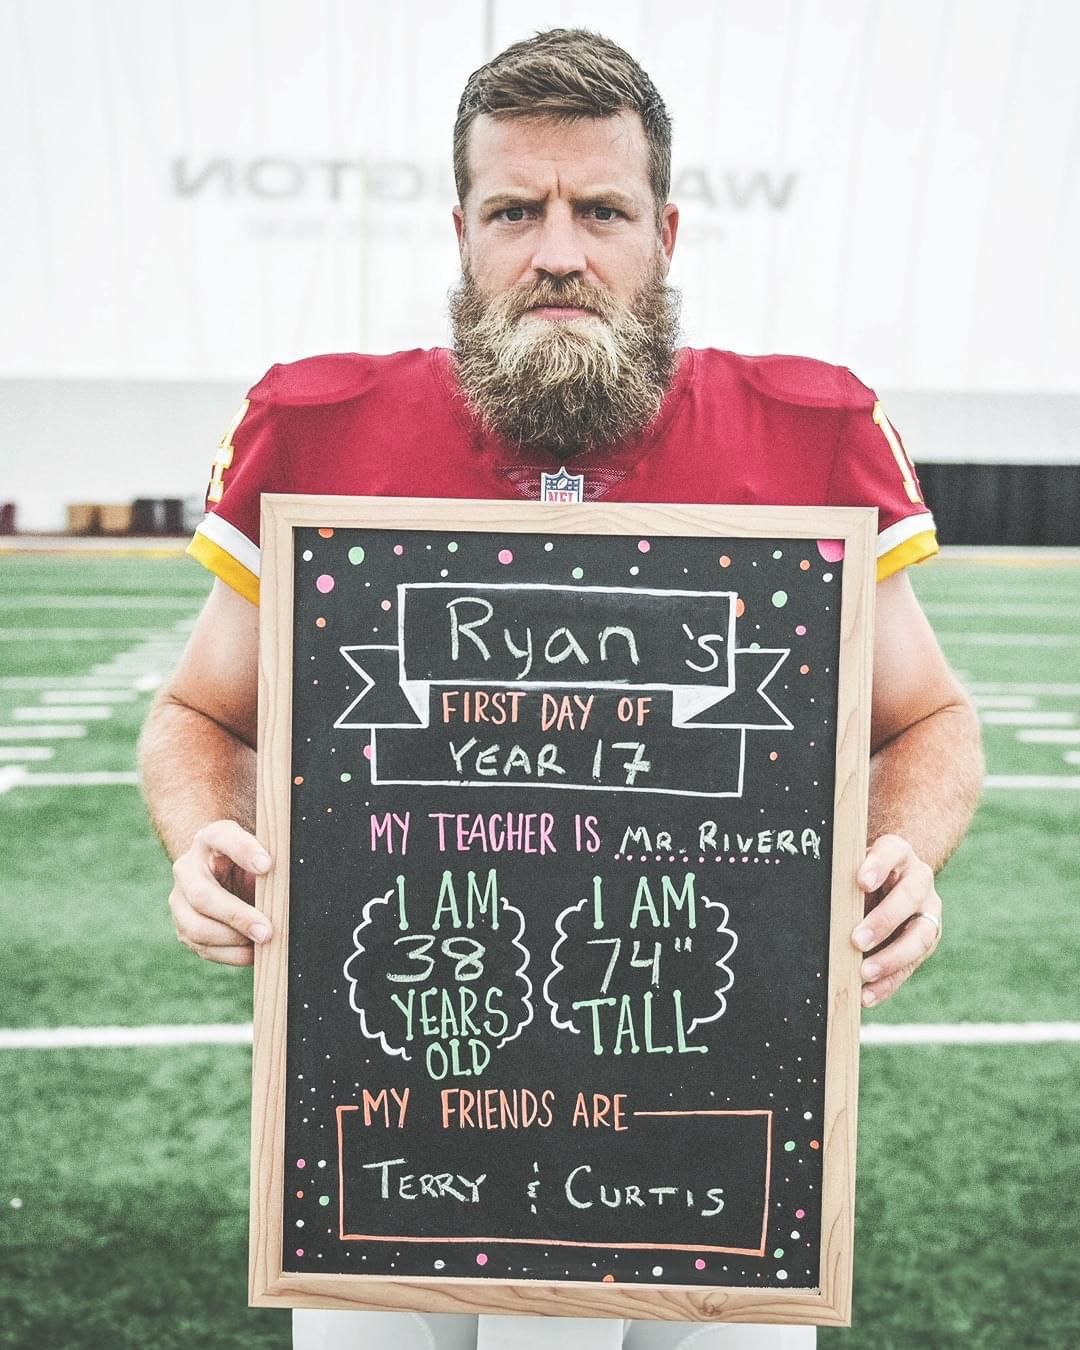 Ryan Fitzpatrick’s first day with a new team!